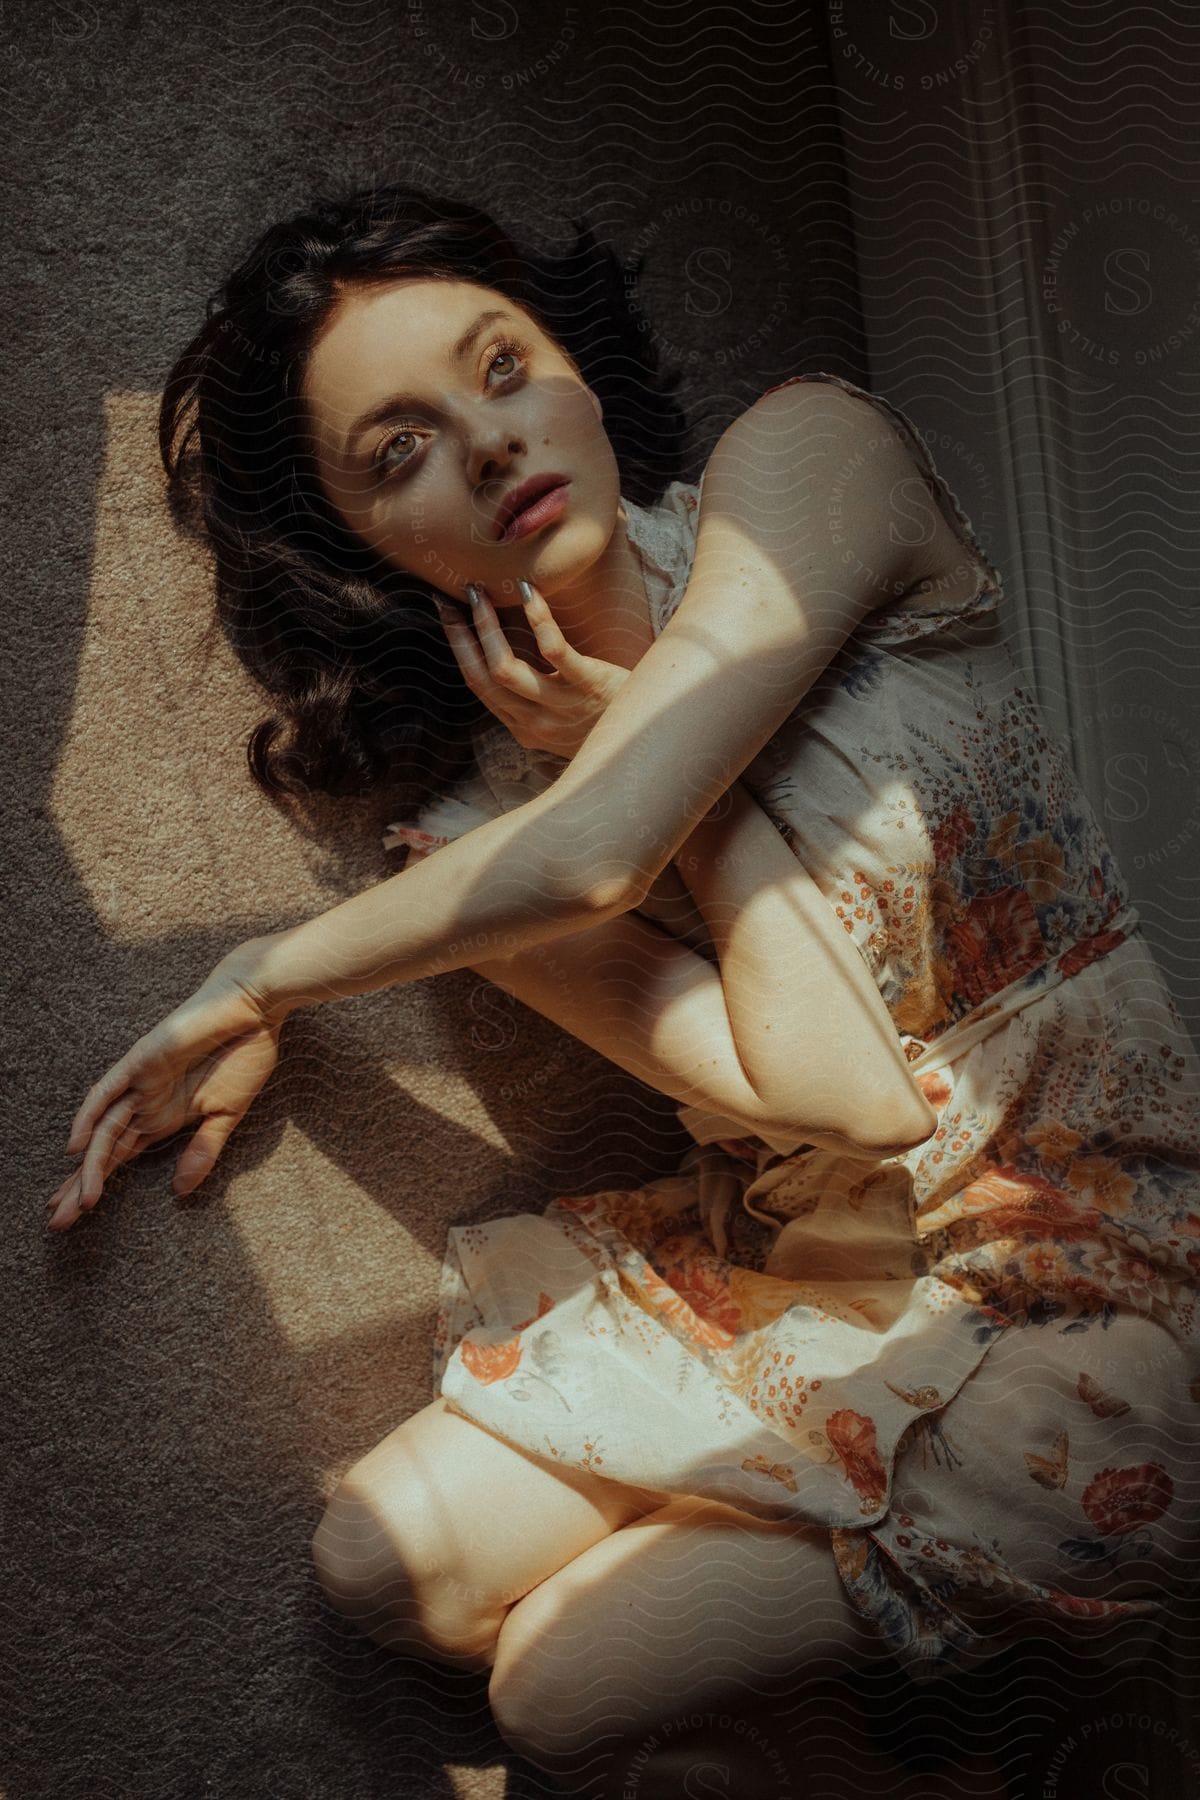 Young woman in vintage flowered dress poses with arm across chest and another on face lying on tan carpet with shadow